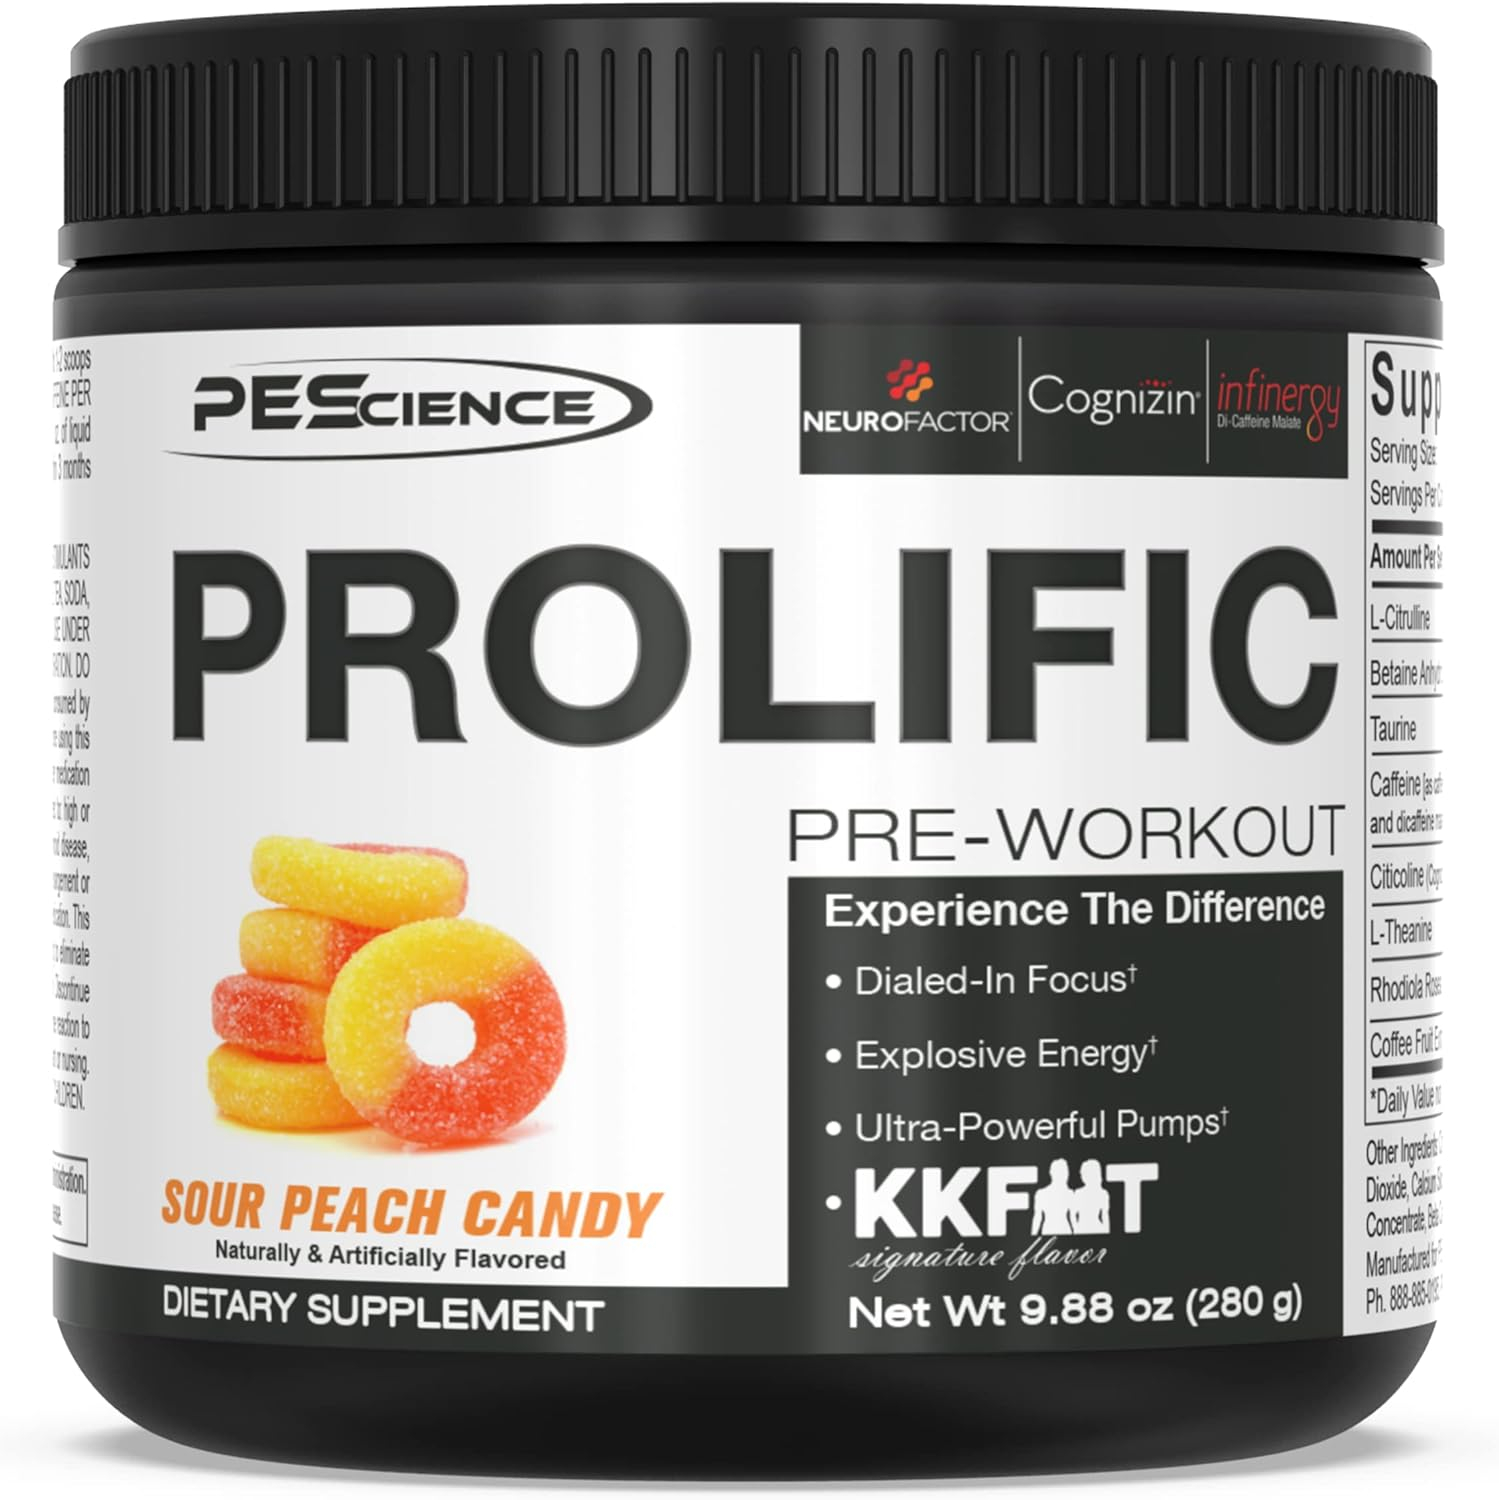 PEScience Prolific Pre Workout Powder, Sour Peach Candy, 40 Scoop, Energy Supplement with Nitric Oxide, KK Fit Signature Flavor